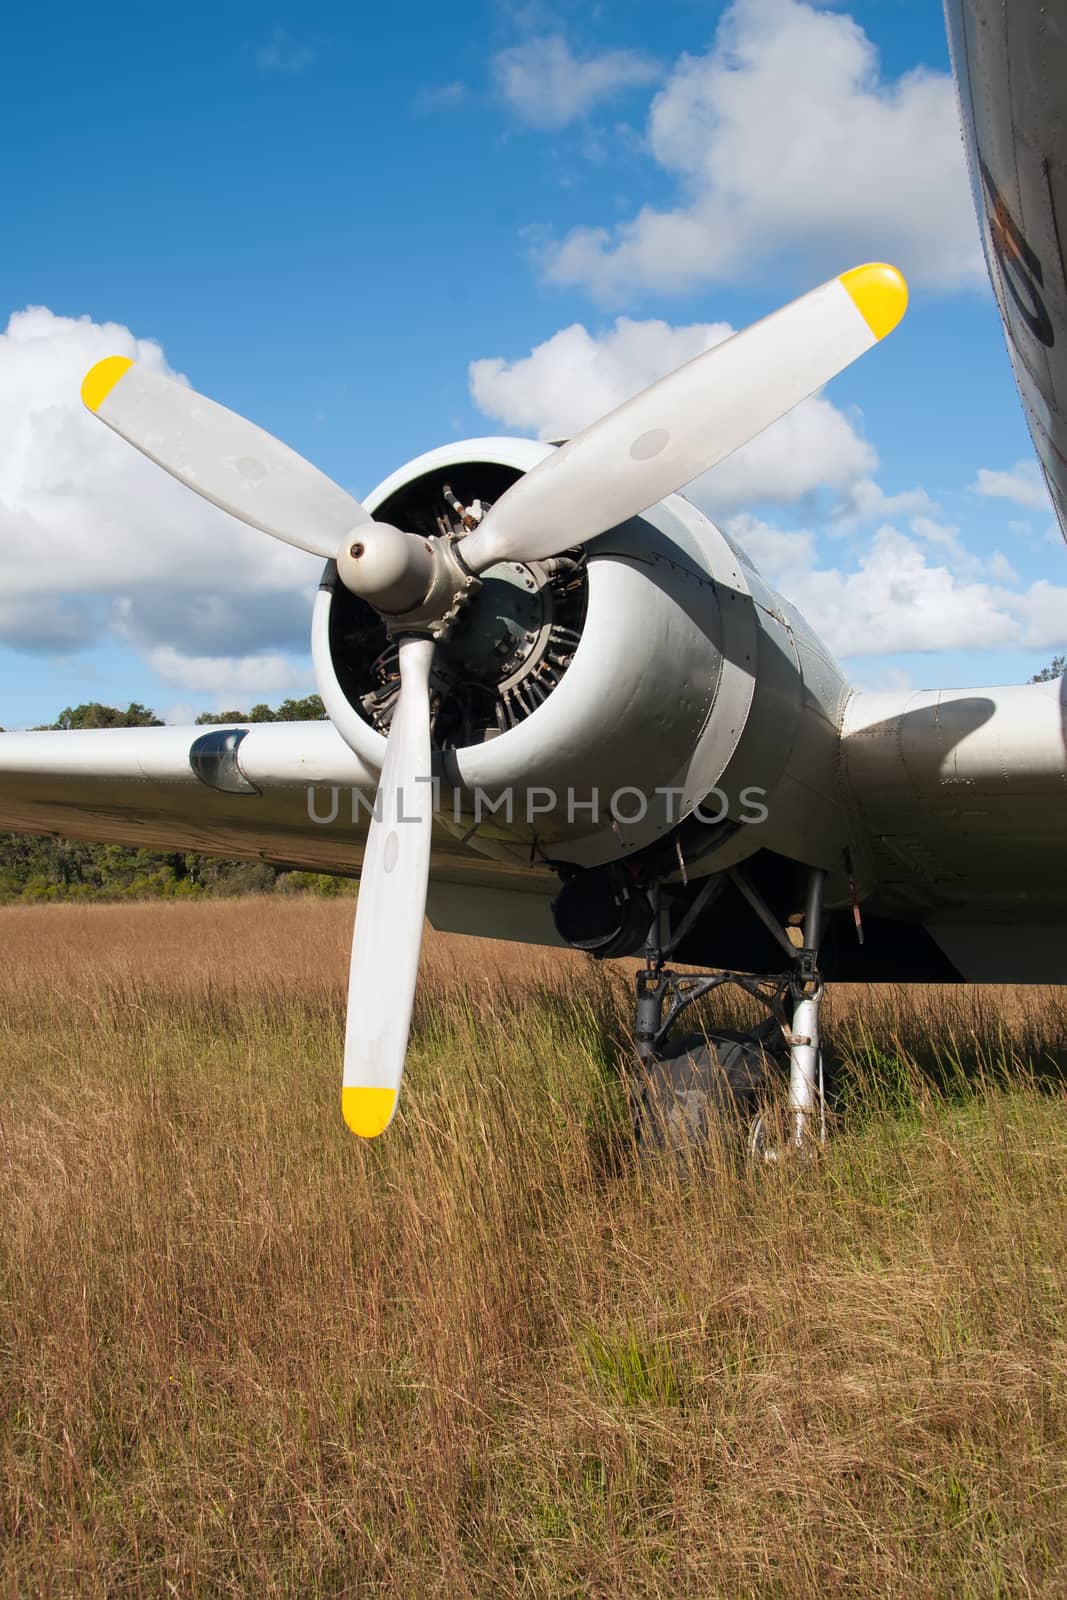 Vertical shot of the propeller and engine cowling of an old DC3 aeroplane